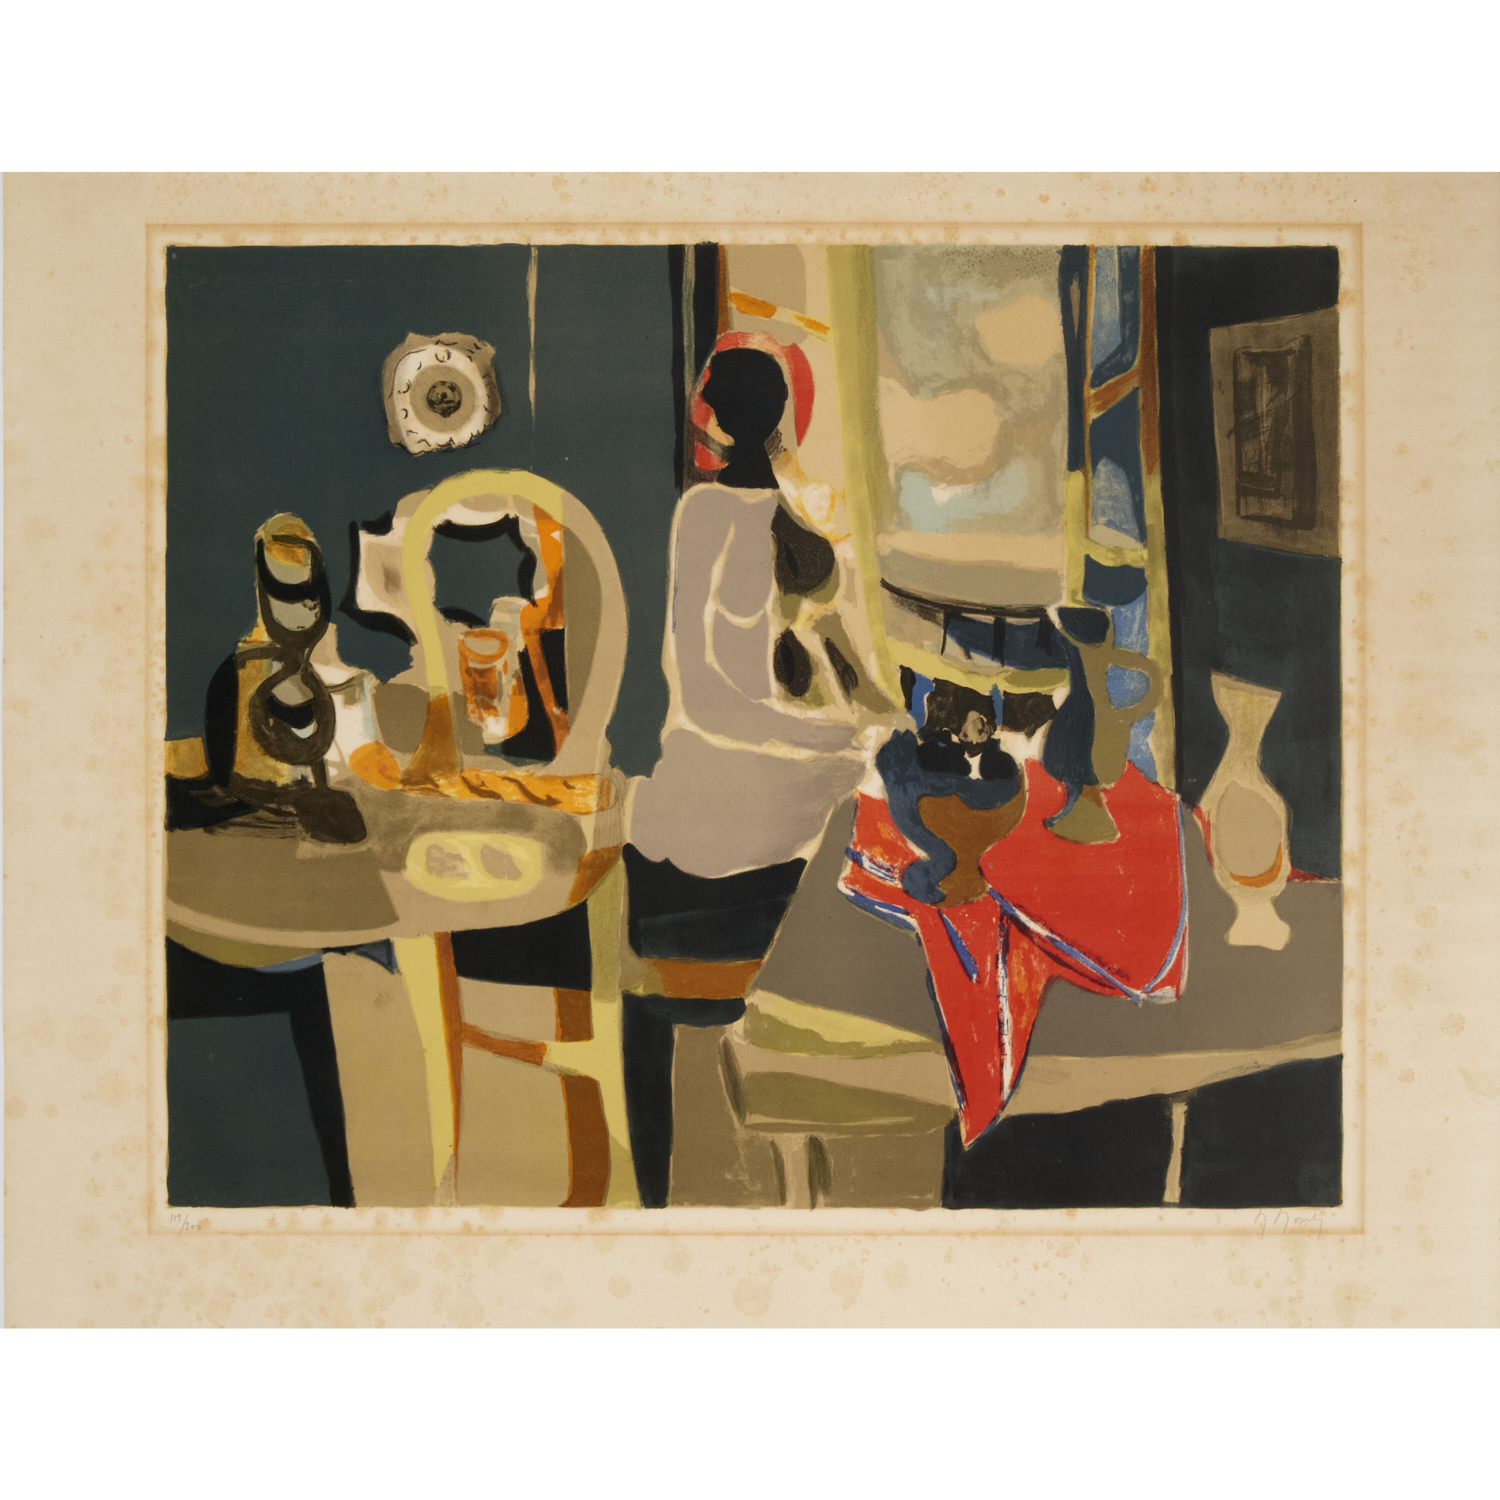 MARCEL MOULY, COLOR LITHOGRAPH Marcel